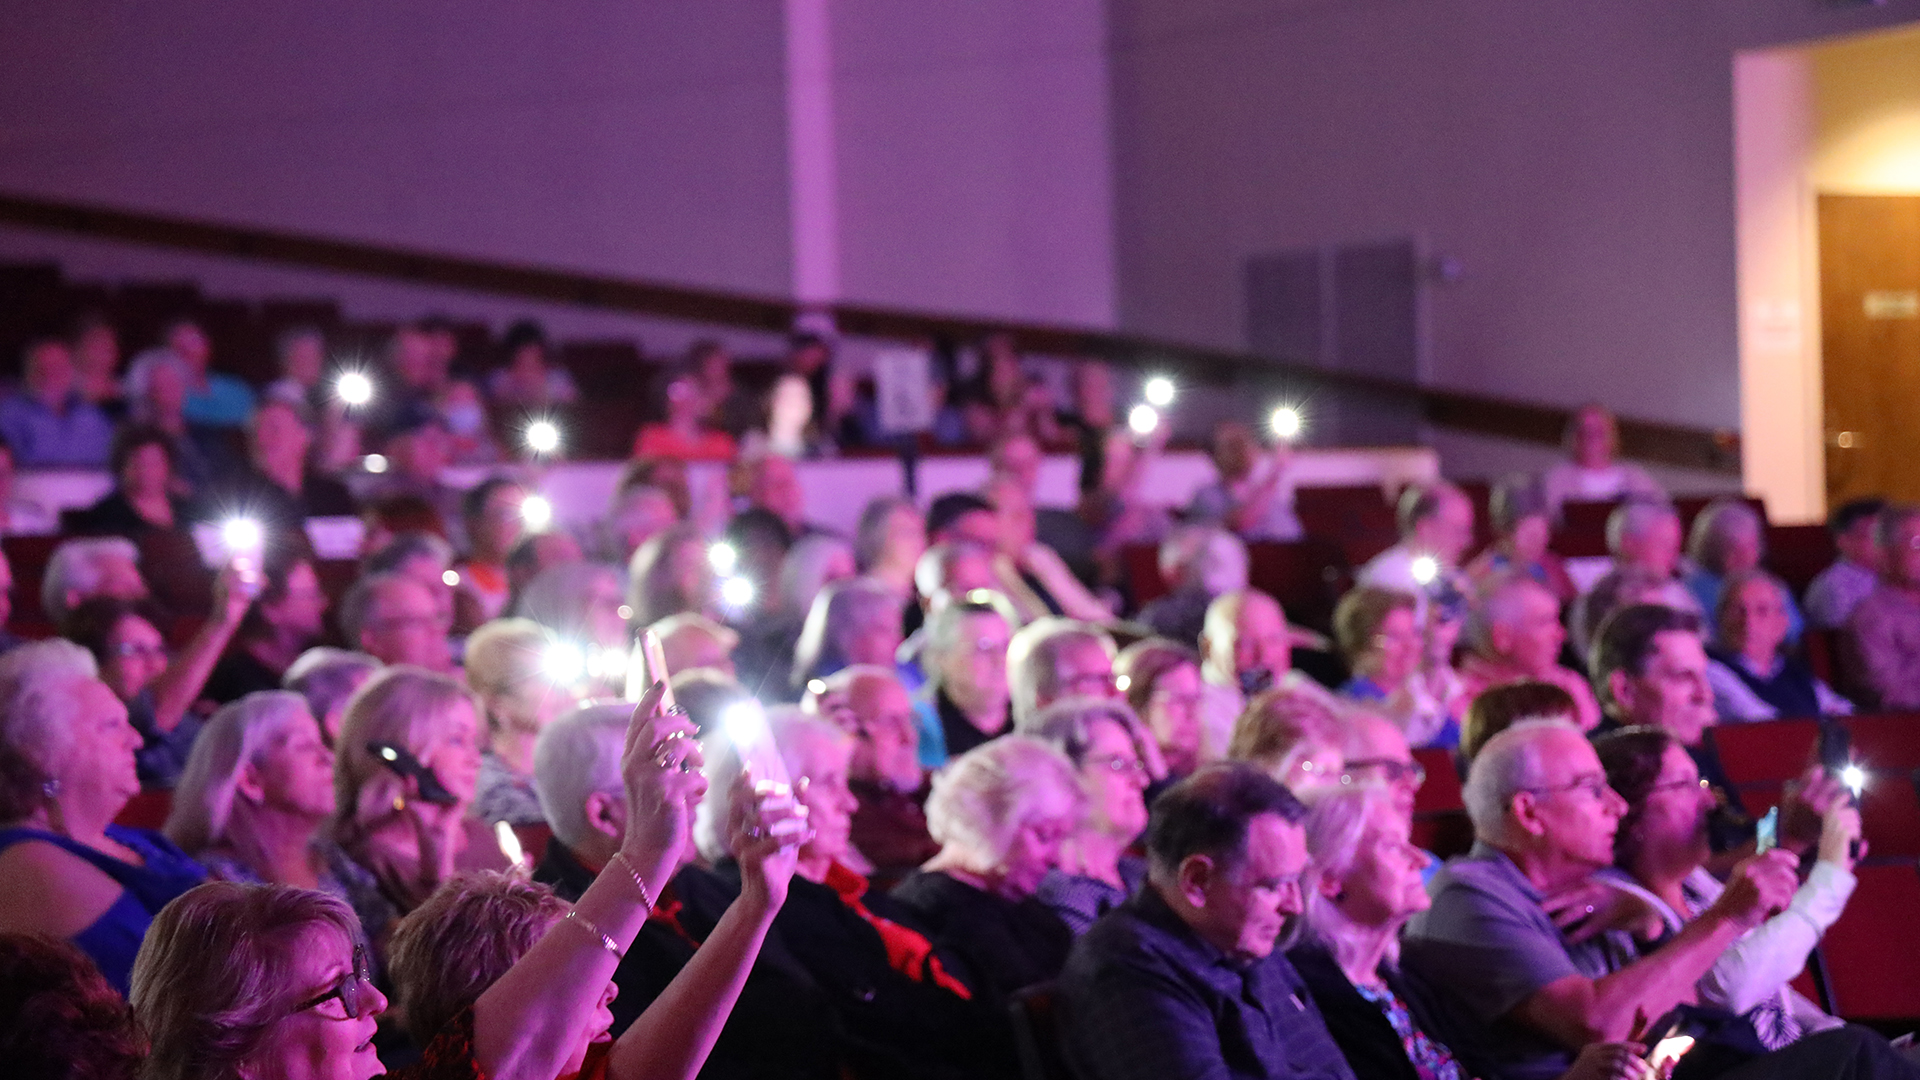 Audience holding up phones with lights on.